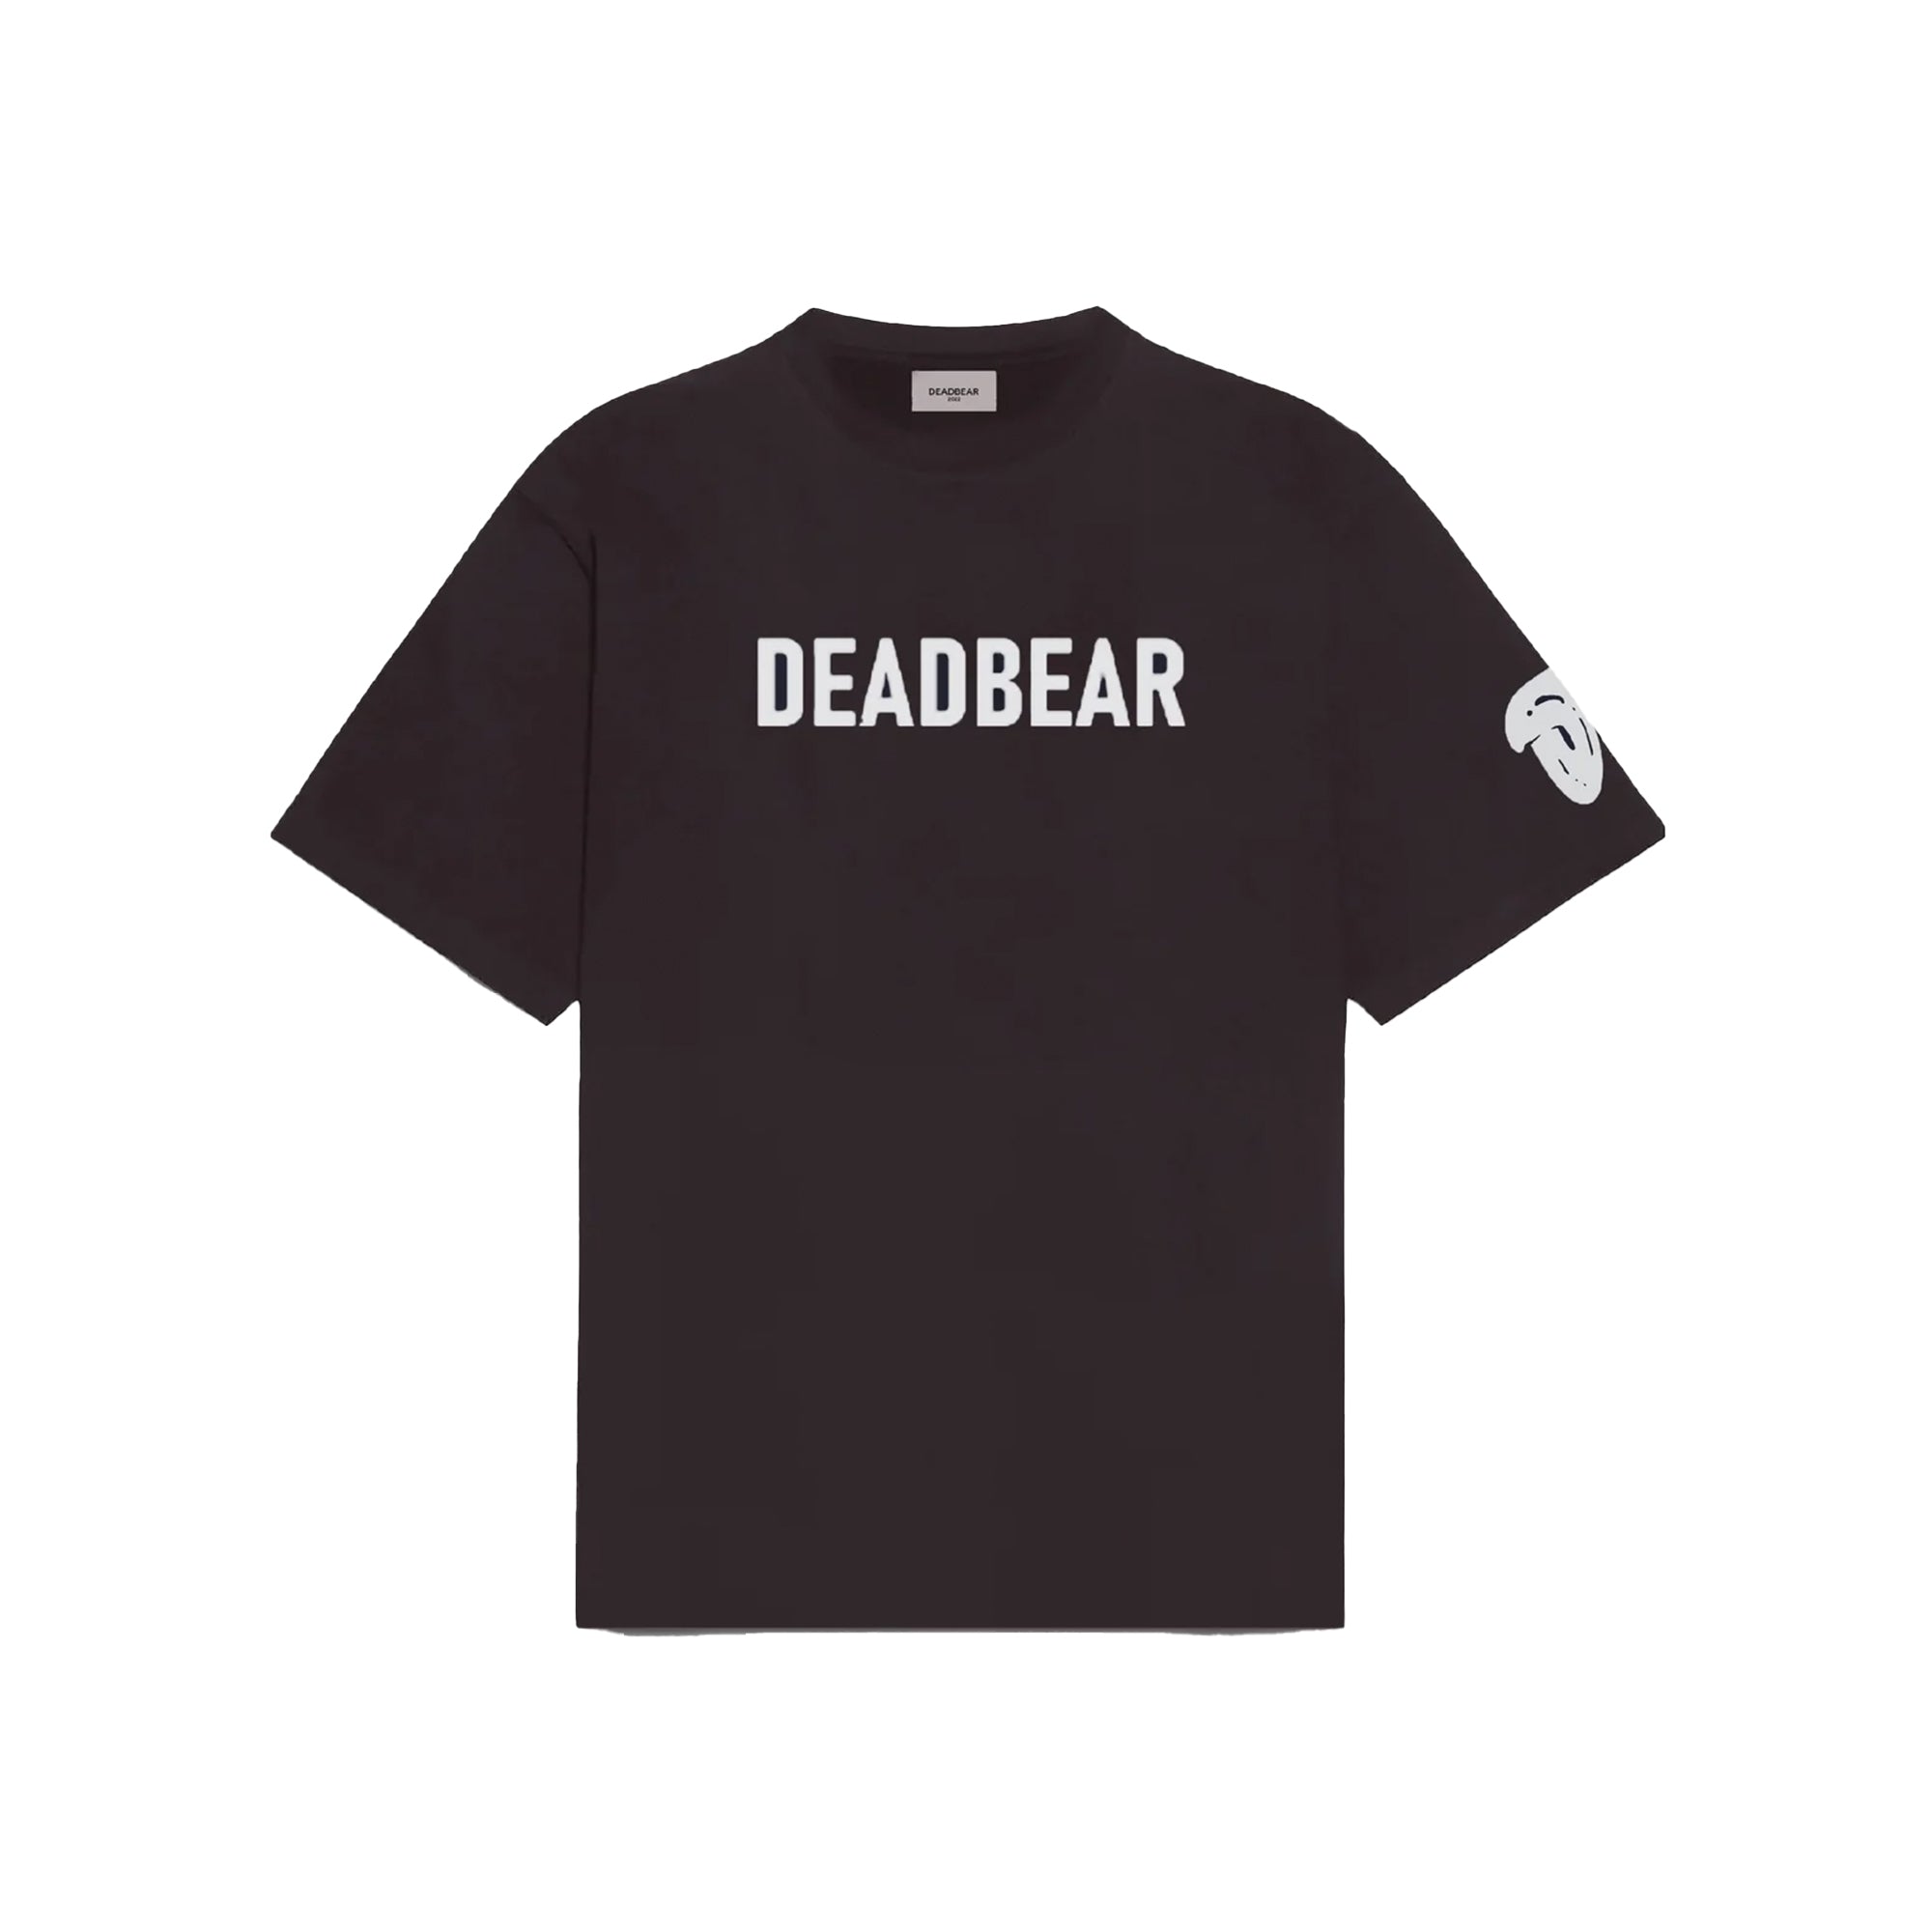 More Dead Than Alive Brown Tee